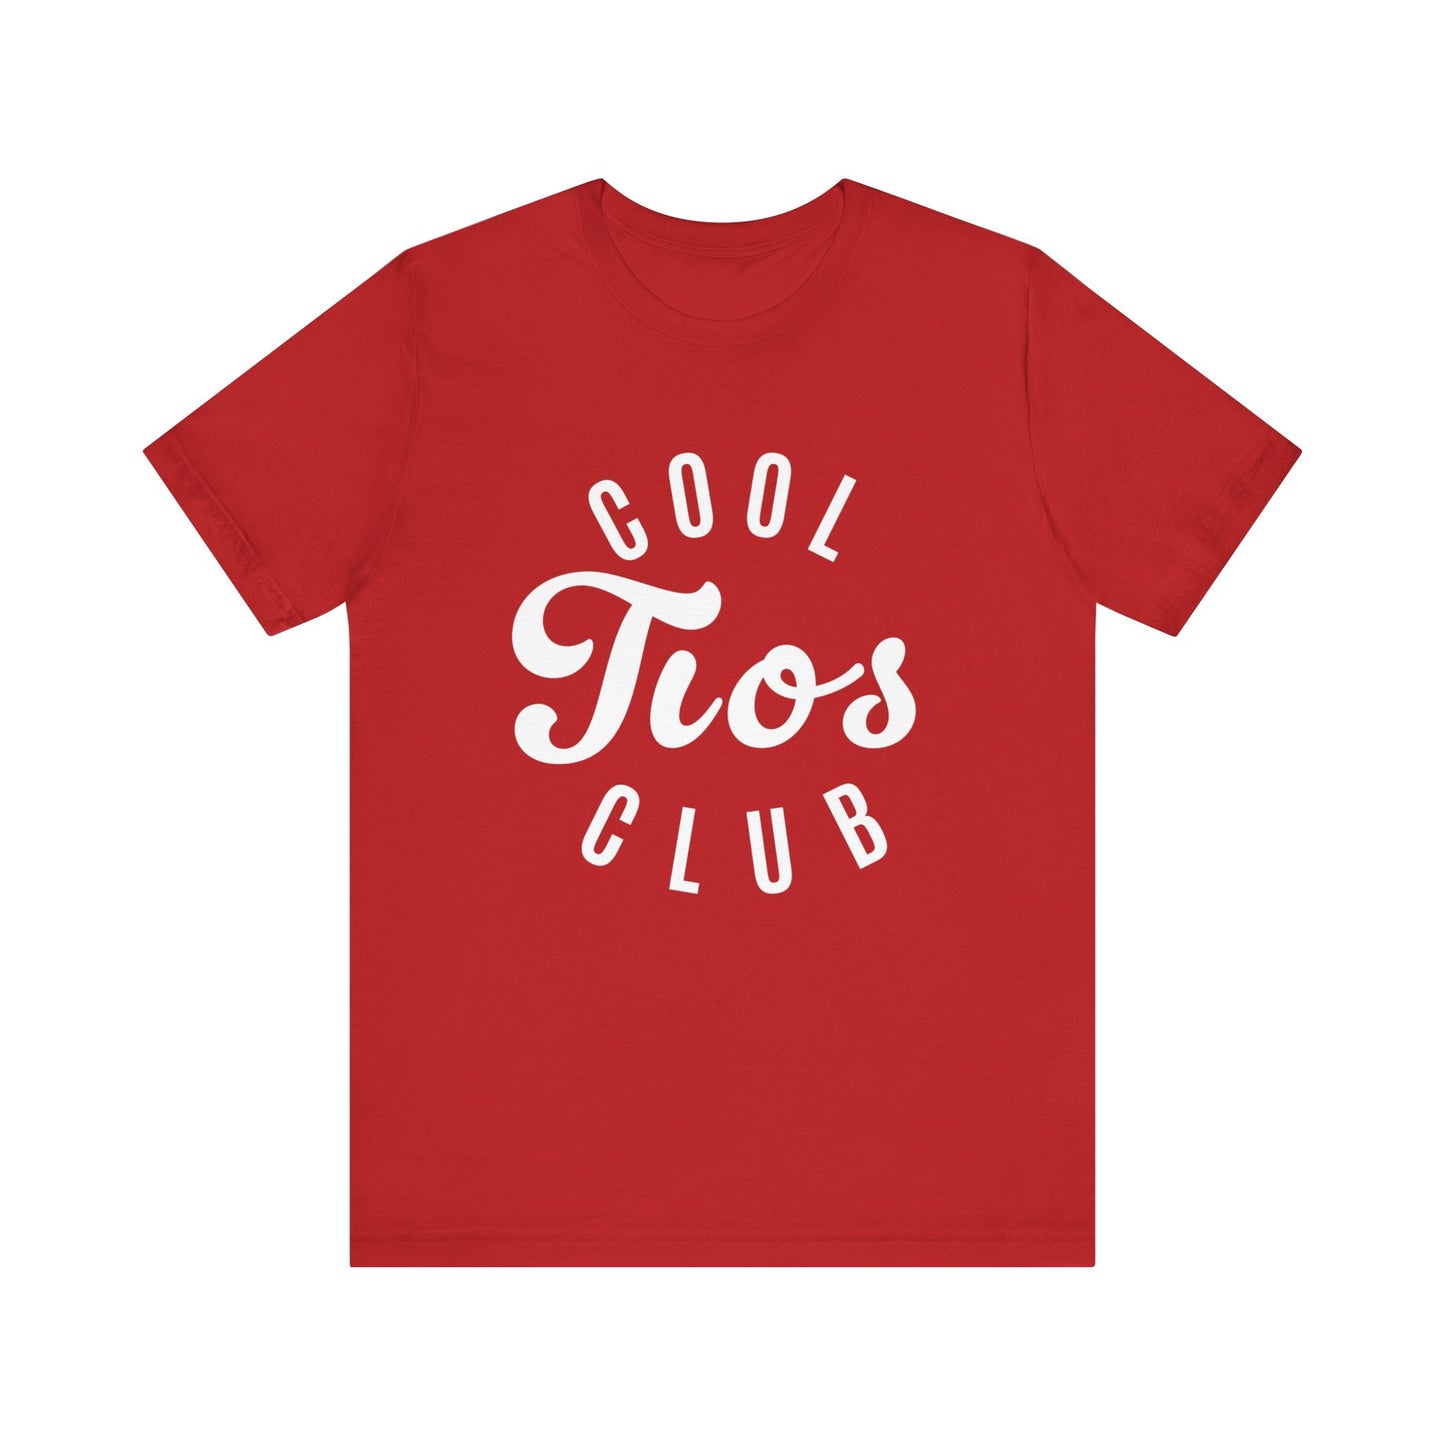 Cool Tios Club Shirt for Men, Pregnancy Announcement TShirt for Tios, Cool Tios T-Shirt for New Tios, Funny Gift for Tios to Be, T1095